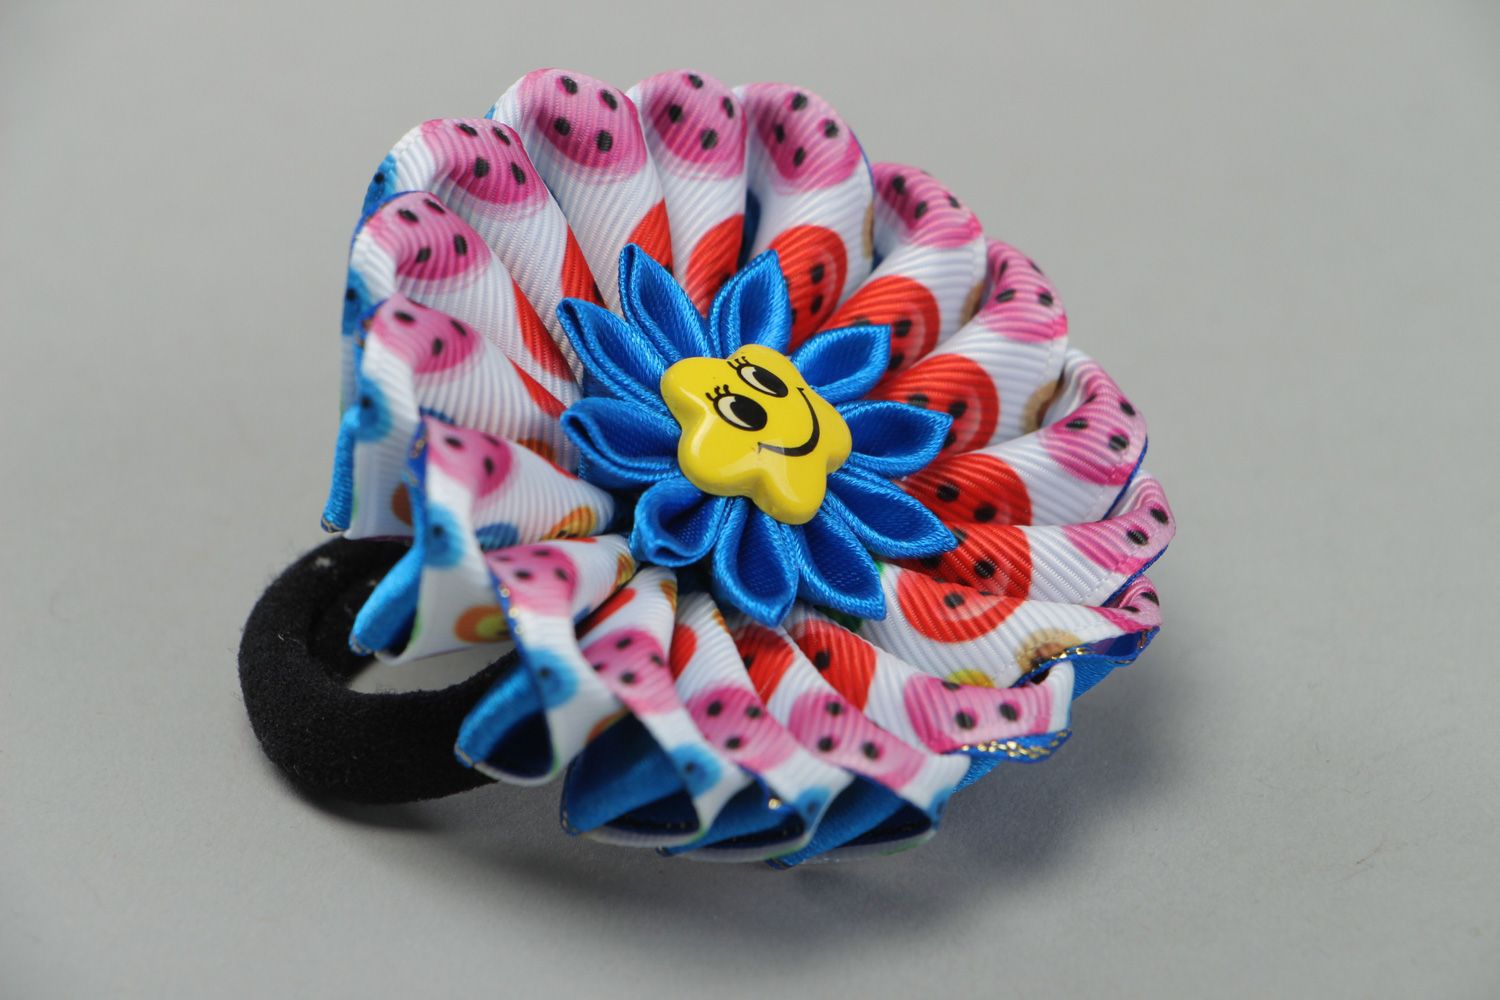 Handmade motley hair tie with volume kanzashi flower made of rep and satin ribbons photo 1